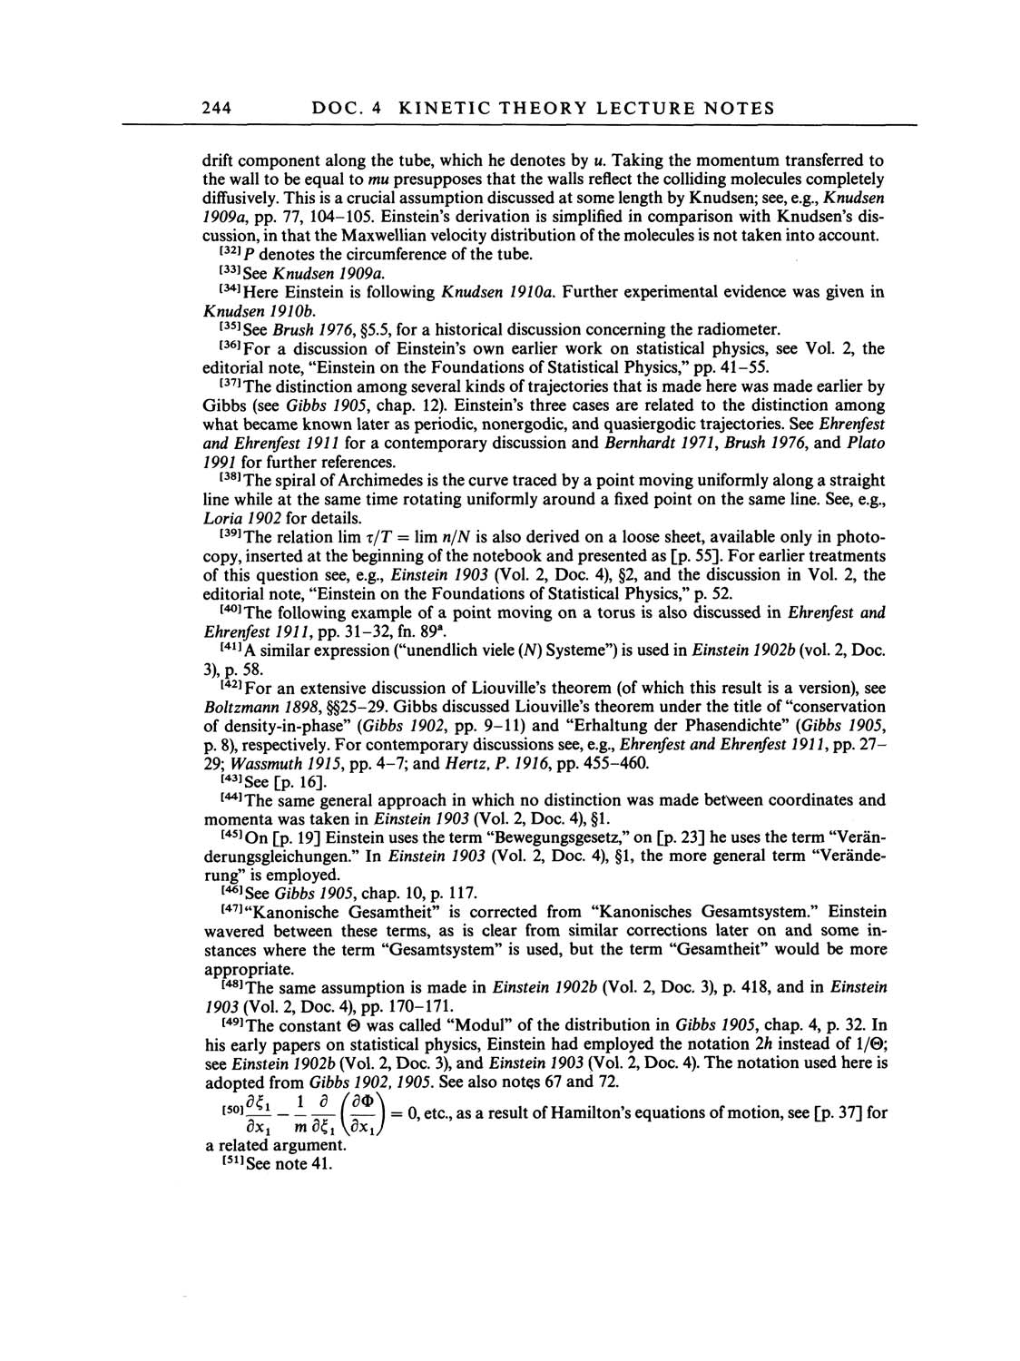 Volume 3: The Swiss Years: Writings 1909-1911 page 244